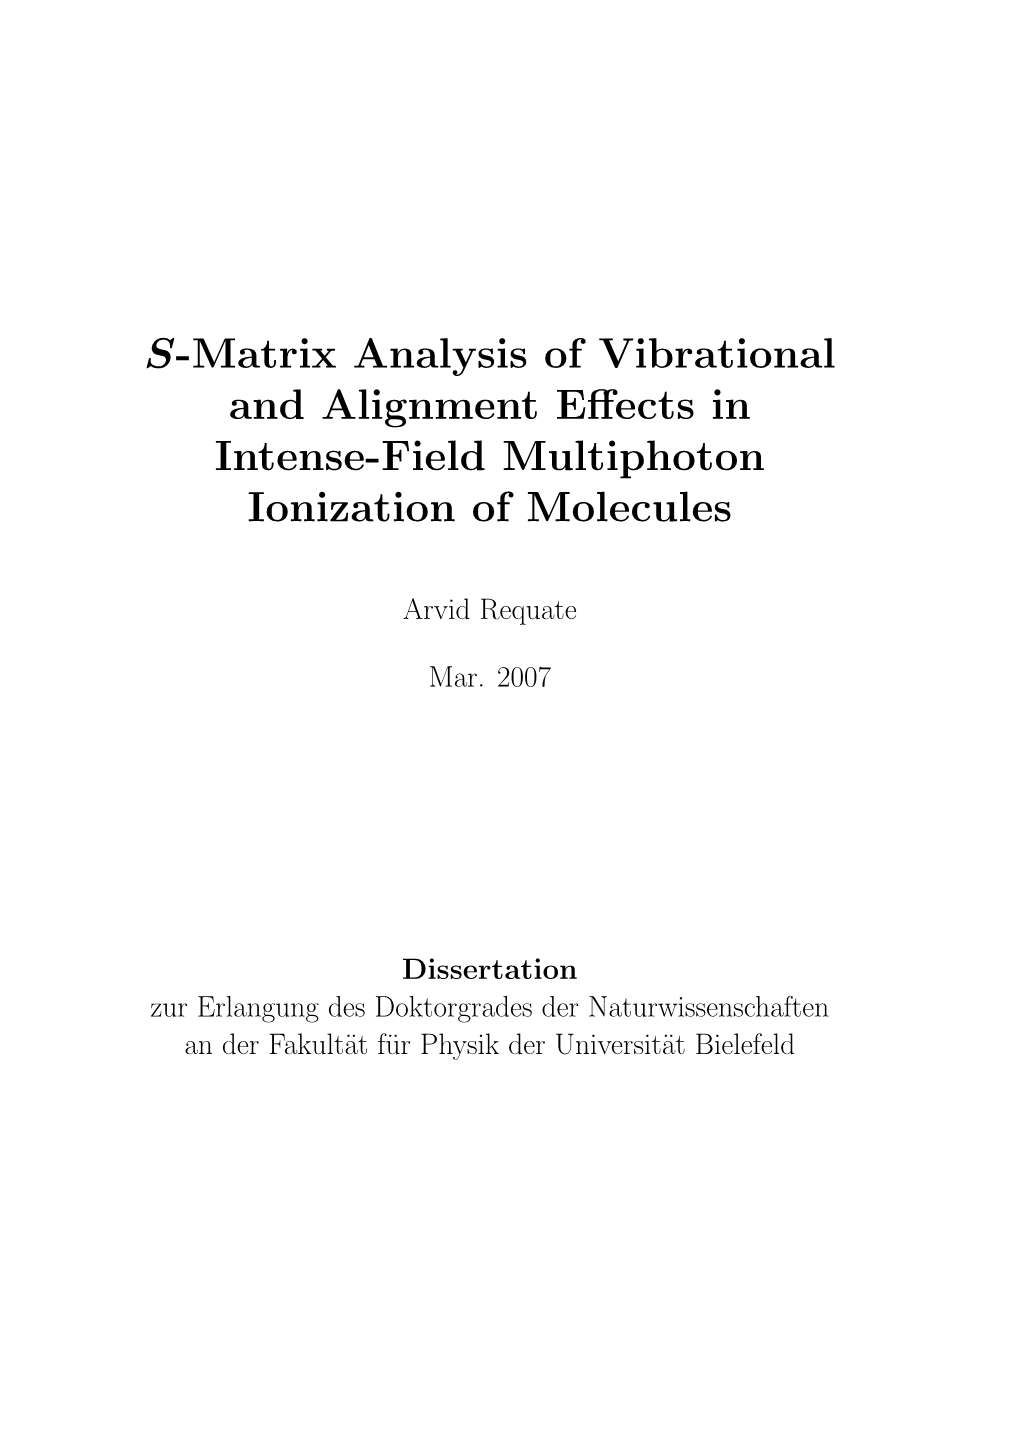 S-Matrix Analysis of Vibrational and Alignment Effects in Intense-Field